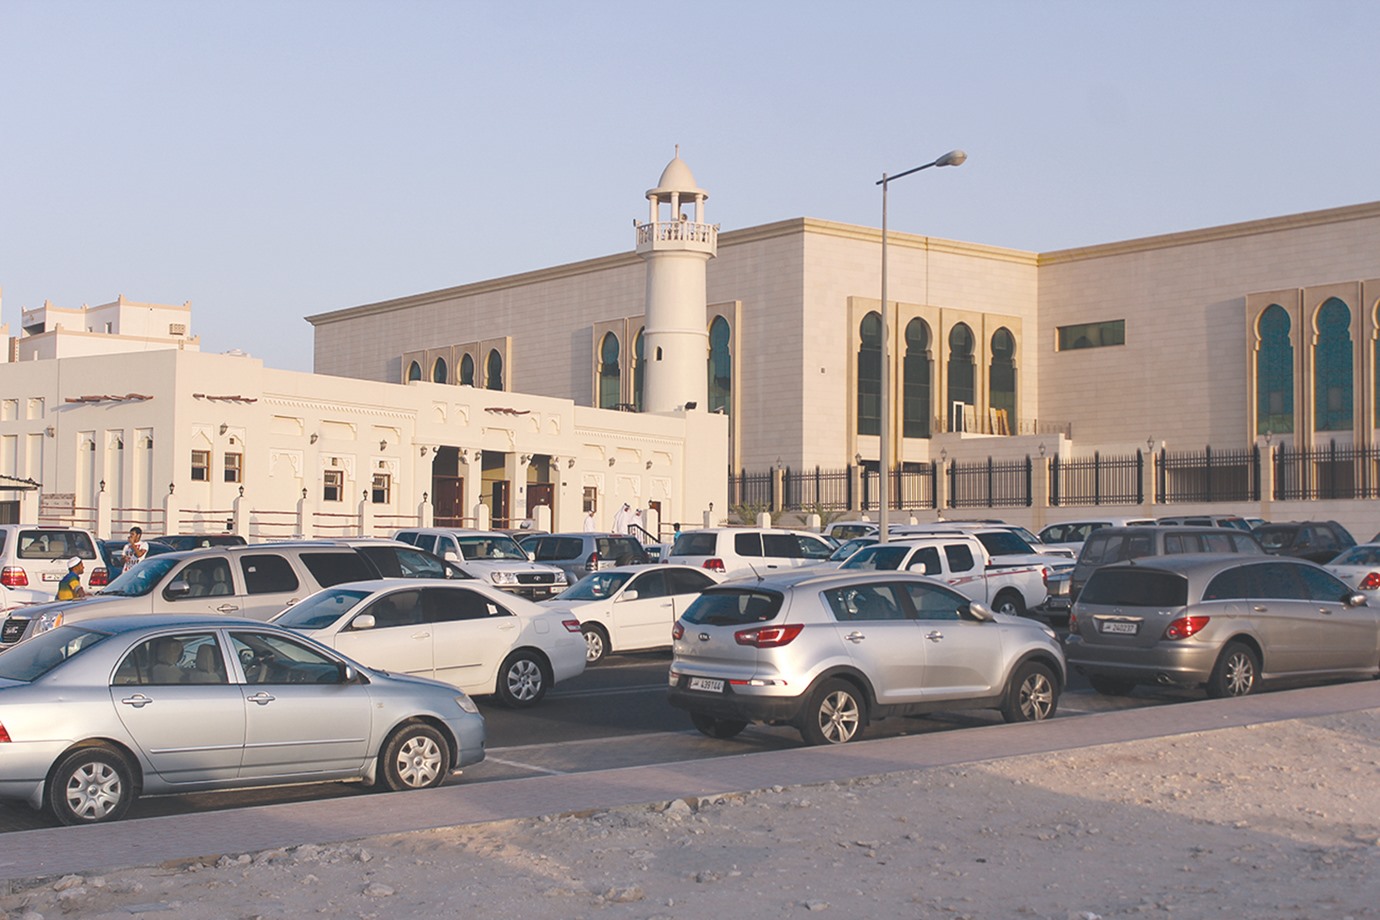 Parking outside mosques